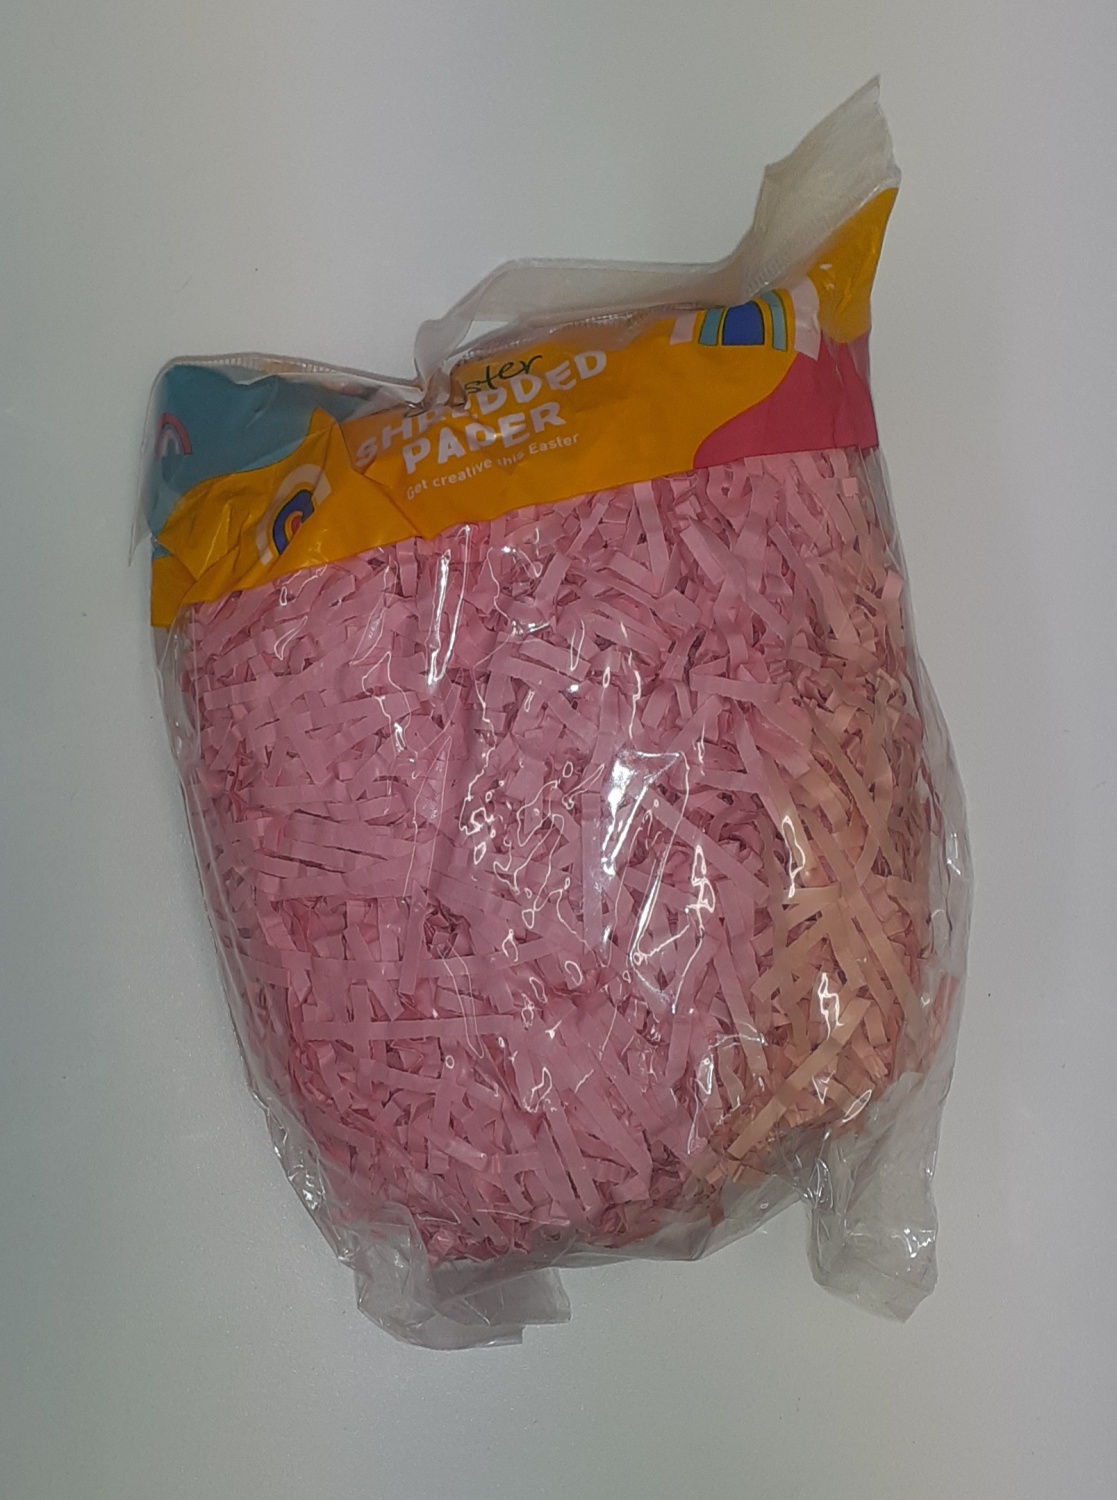 George Easter Pink Shredded Paper RRP £1 CLEARANCE XL 59p or 2 for £1